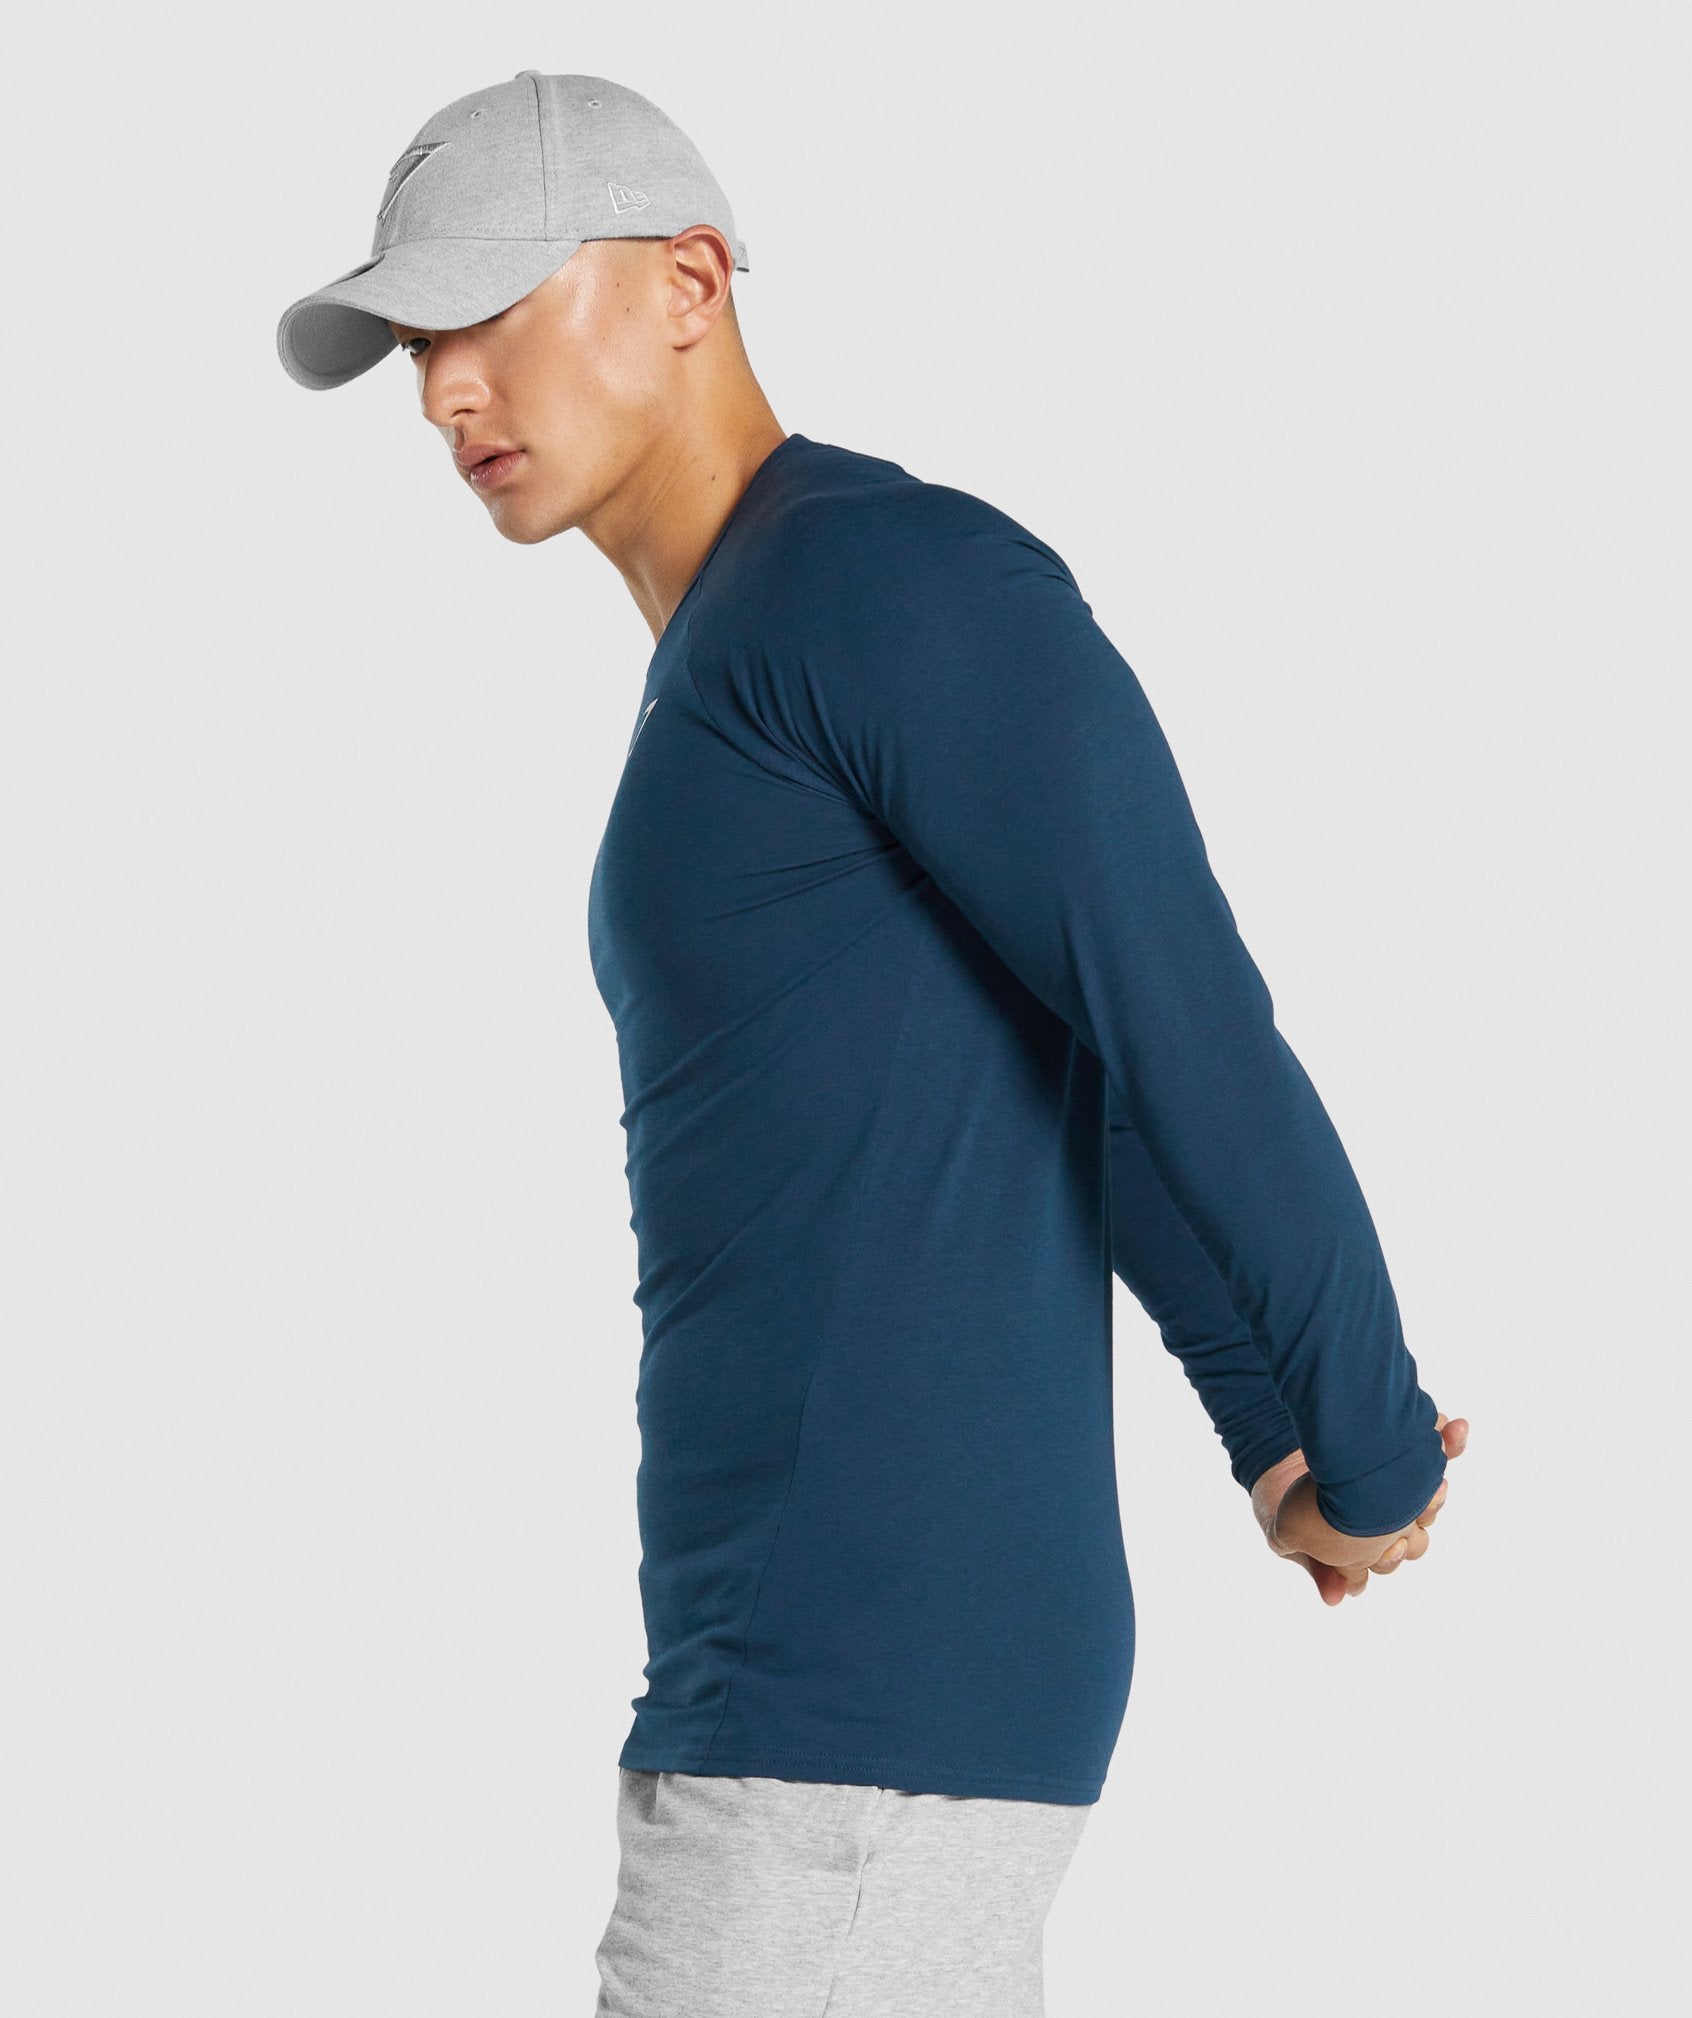 Critical 2.0 Long Sleeve T-Shirt in Navy - view 3